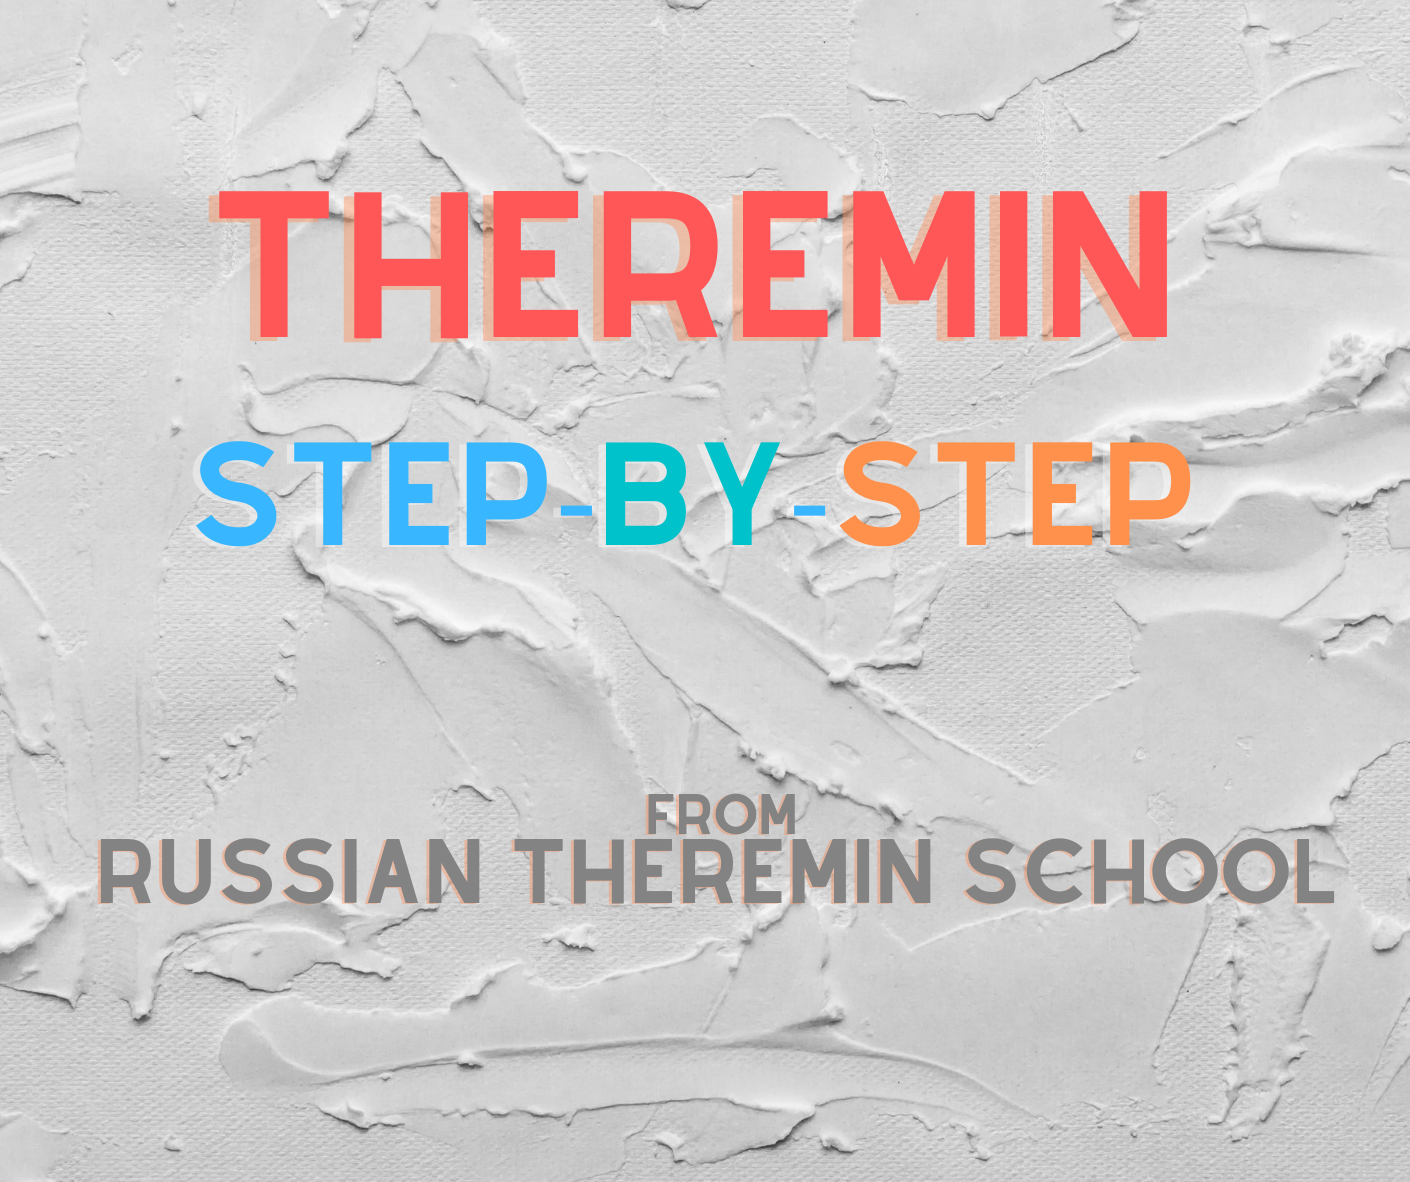 Theremin step-by-step: educational cycle for theremin beginners